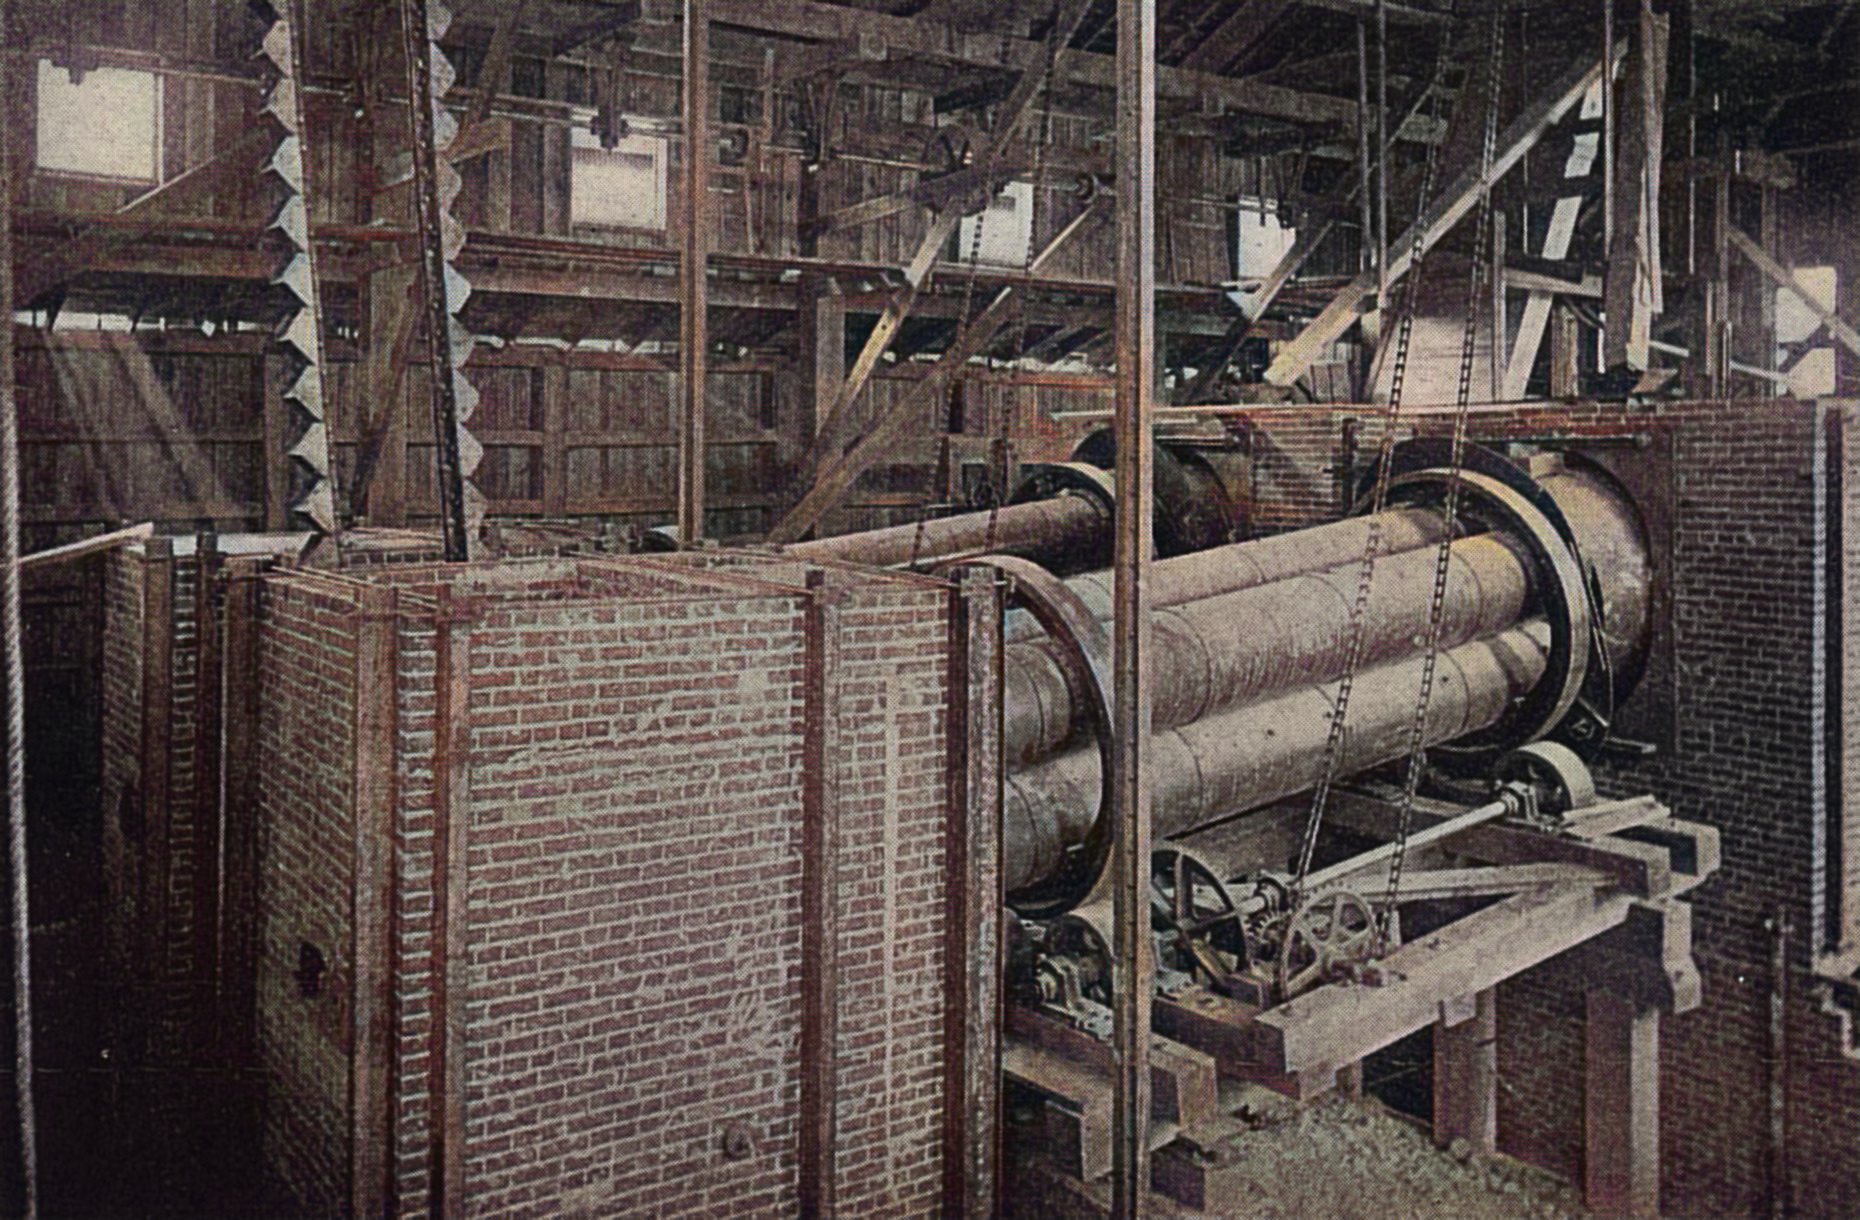 View of the No. 2 dryer while in process of erection at the Metallic Mill. Its capacity was 180 to 200 tons per day. The dryers this mill used back in 1897/98 when this image was taken was of the tubular pattern. The No. 1 dryer consisted of four steel tubes nested together inside two track-bands and connected at the feed and discharge ends by two hoods. The tubes were lined with fireclay tile and revolve as one cylinder.
   As the text this image came with said; ''It will be noticed that the ore is divided into four thin streams and brought into intimate contact with the heated air and gases passing through the 18-in. tubes of the dryer. The motion of the ore advancing in these small tubes is very gentle and regular, and consequently produces but little dust. An improvement in the single cylinder dryer consisted in dividing it into quadrants by plates placed at right angles extending longitudinally through the cylinder. This improvement increased the drying efficiency of the cylinder at the expense of a higher dust loss and greater wear and tear, as the ore is alternately sliding along the plates from the center to the periphery and back to the center again during a revolution of the cylinder. By using four or more small tile-lined cylinders instead of one large cylinder divided into quadrants it was succeeded in again increasing the efficiency and reducing the dust loss and wear at the same time. It will be noticed that this tubular dryer is always in balance, the ore in an ascending tube being balanced by that in a descending one, or very nearly so. The capacity of No. 1 dryer is 80 to 100 tons per day.''
   This seems to have been an invention by Philip Argall and hence it is named 'Argall Drying Furnace'. I did procure the colored version of this image. Source was gray-toned, or in common speech black & white. Used an online service and tweaked and worked with image to get what looks best to my eyes for the moment.